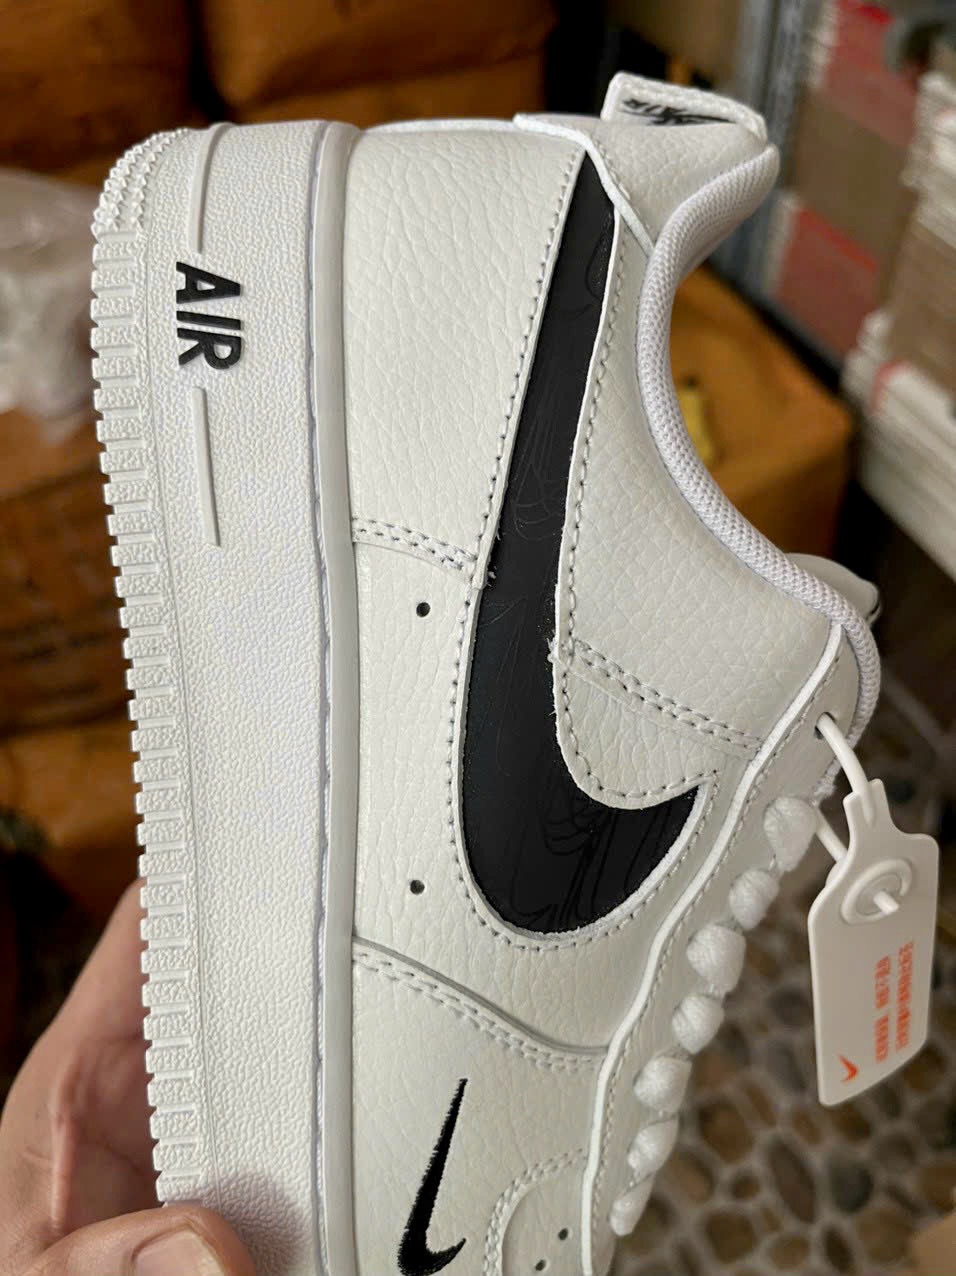 Giày Nike Air Force 1 Low Reflective Swoosh White Black Best Quality